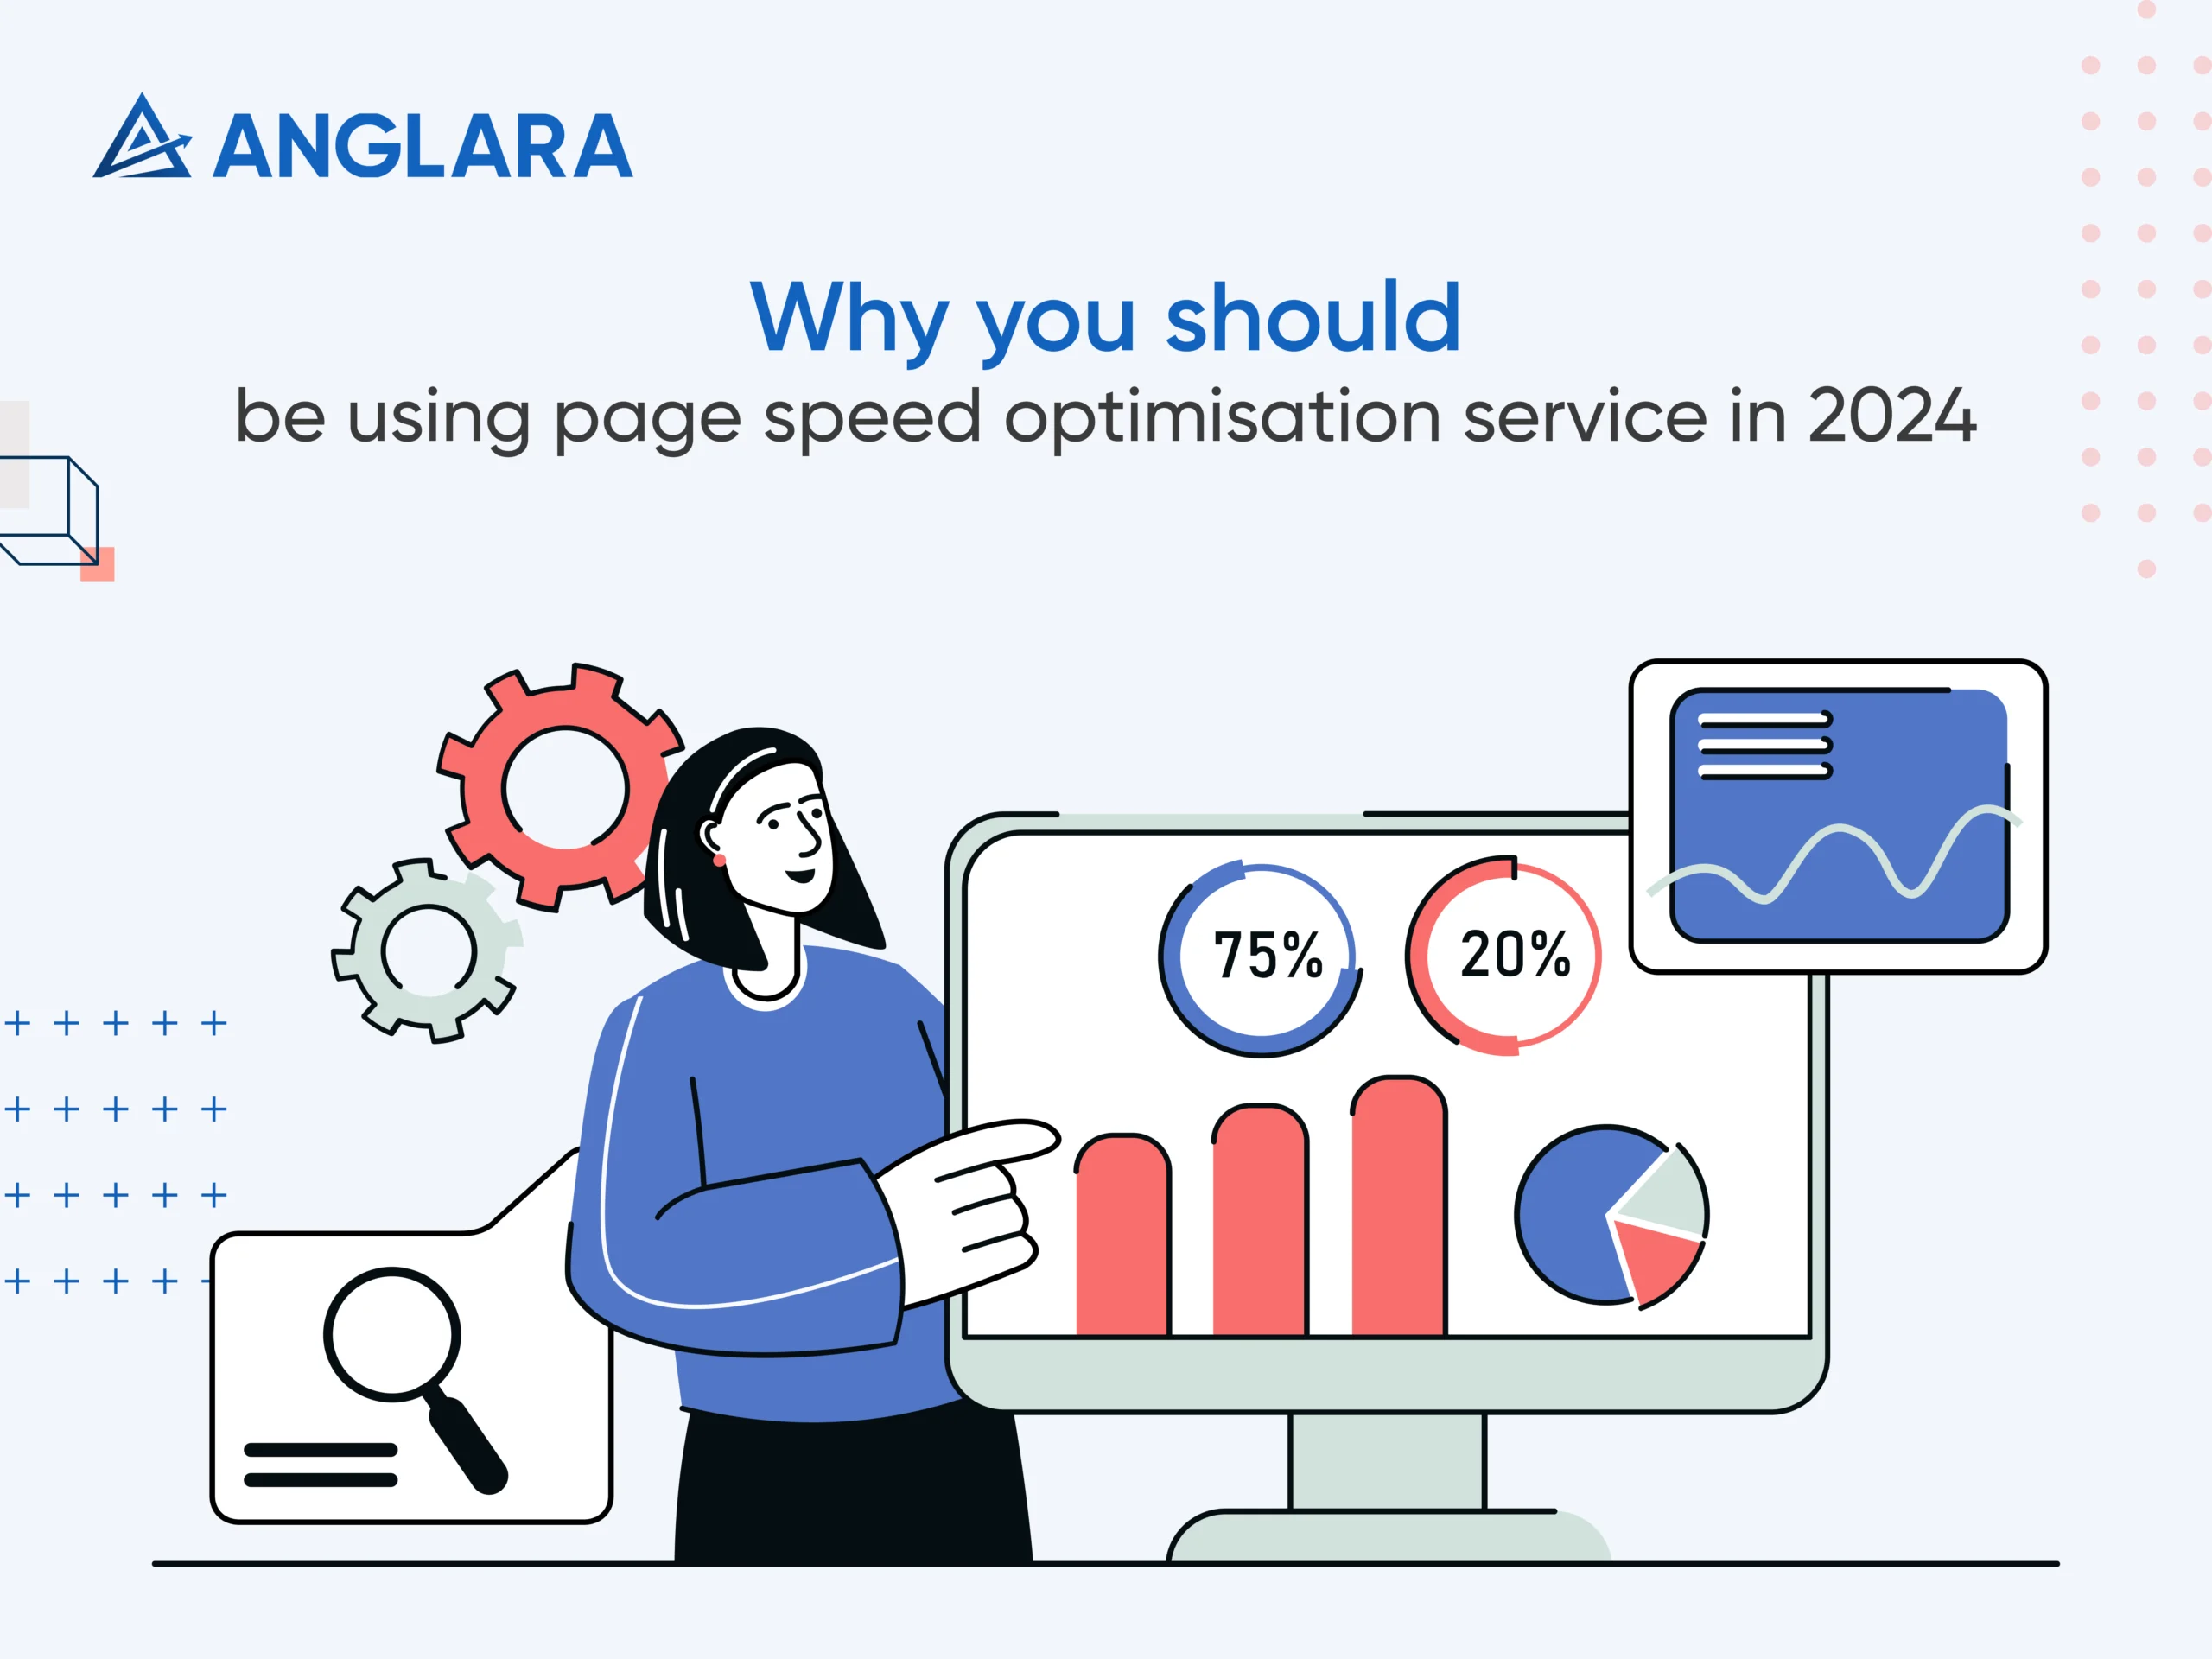 Why you should be using page speed optimisation service in 2024